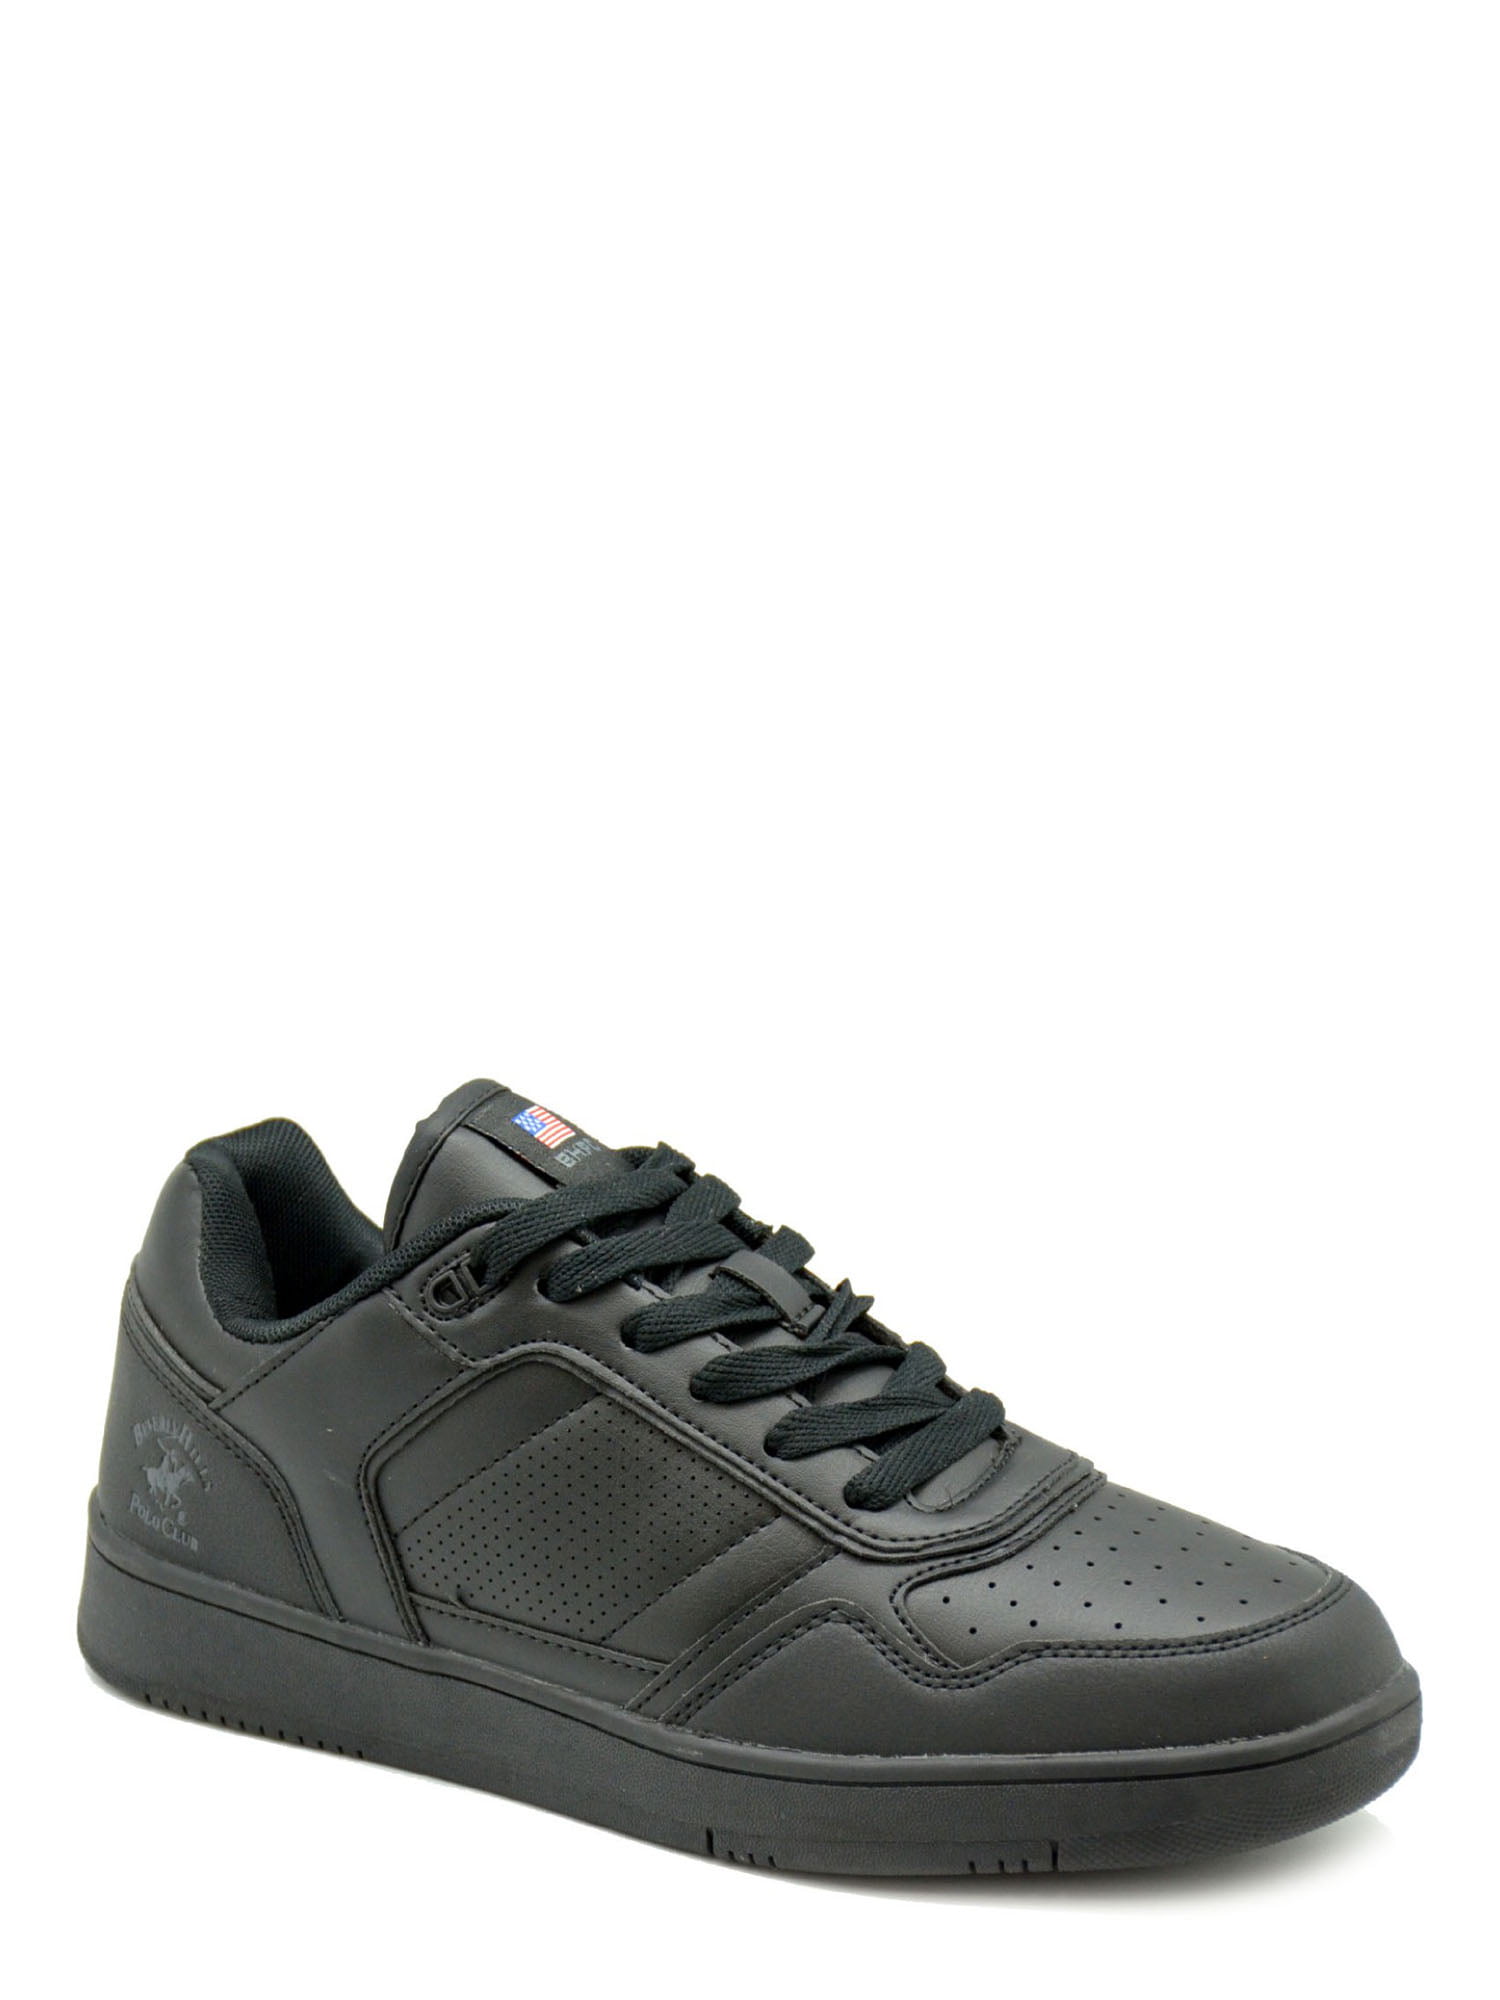 Shoes For Crews Freestyle II Men's Black Sneakers, Slip Resistant And Water  Resistant Work Shoes 